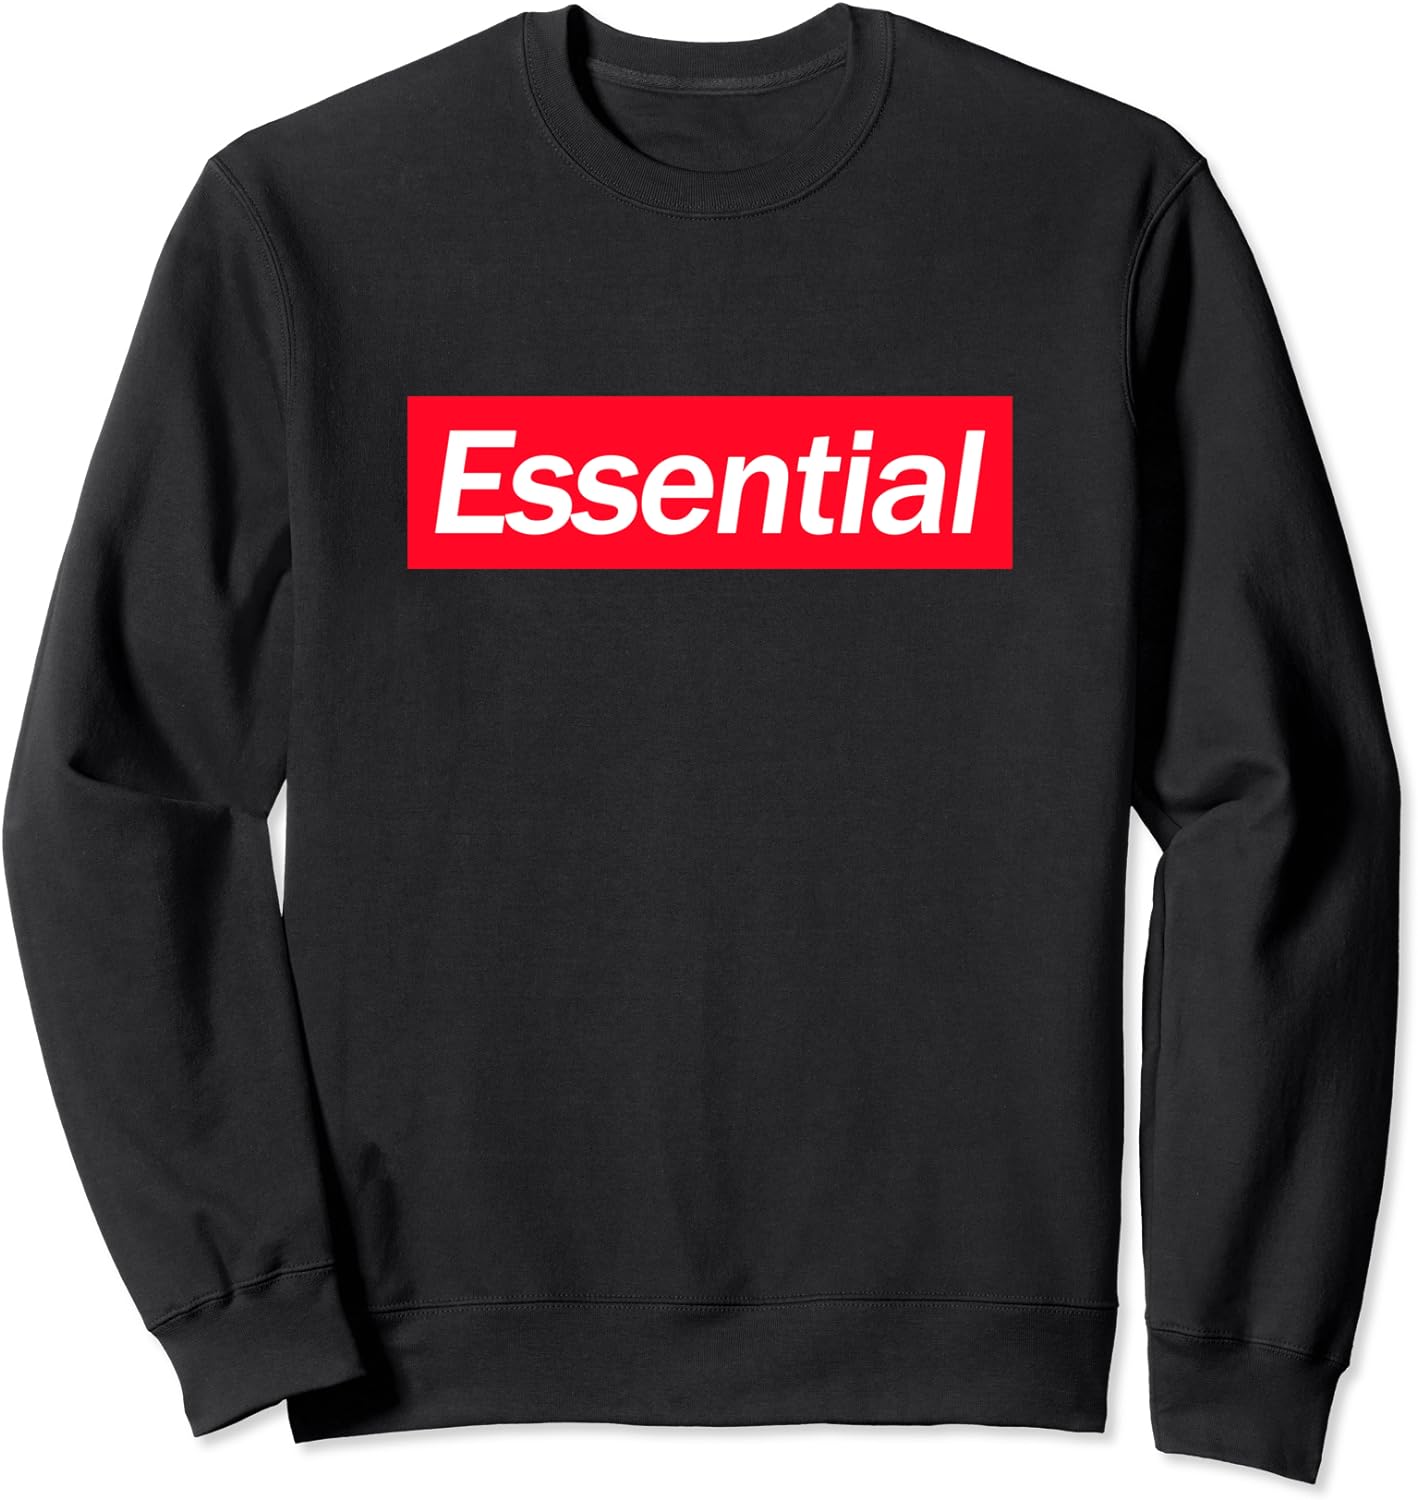 Embrace Fall with Must Have Essentials Sweatshirts